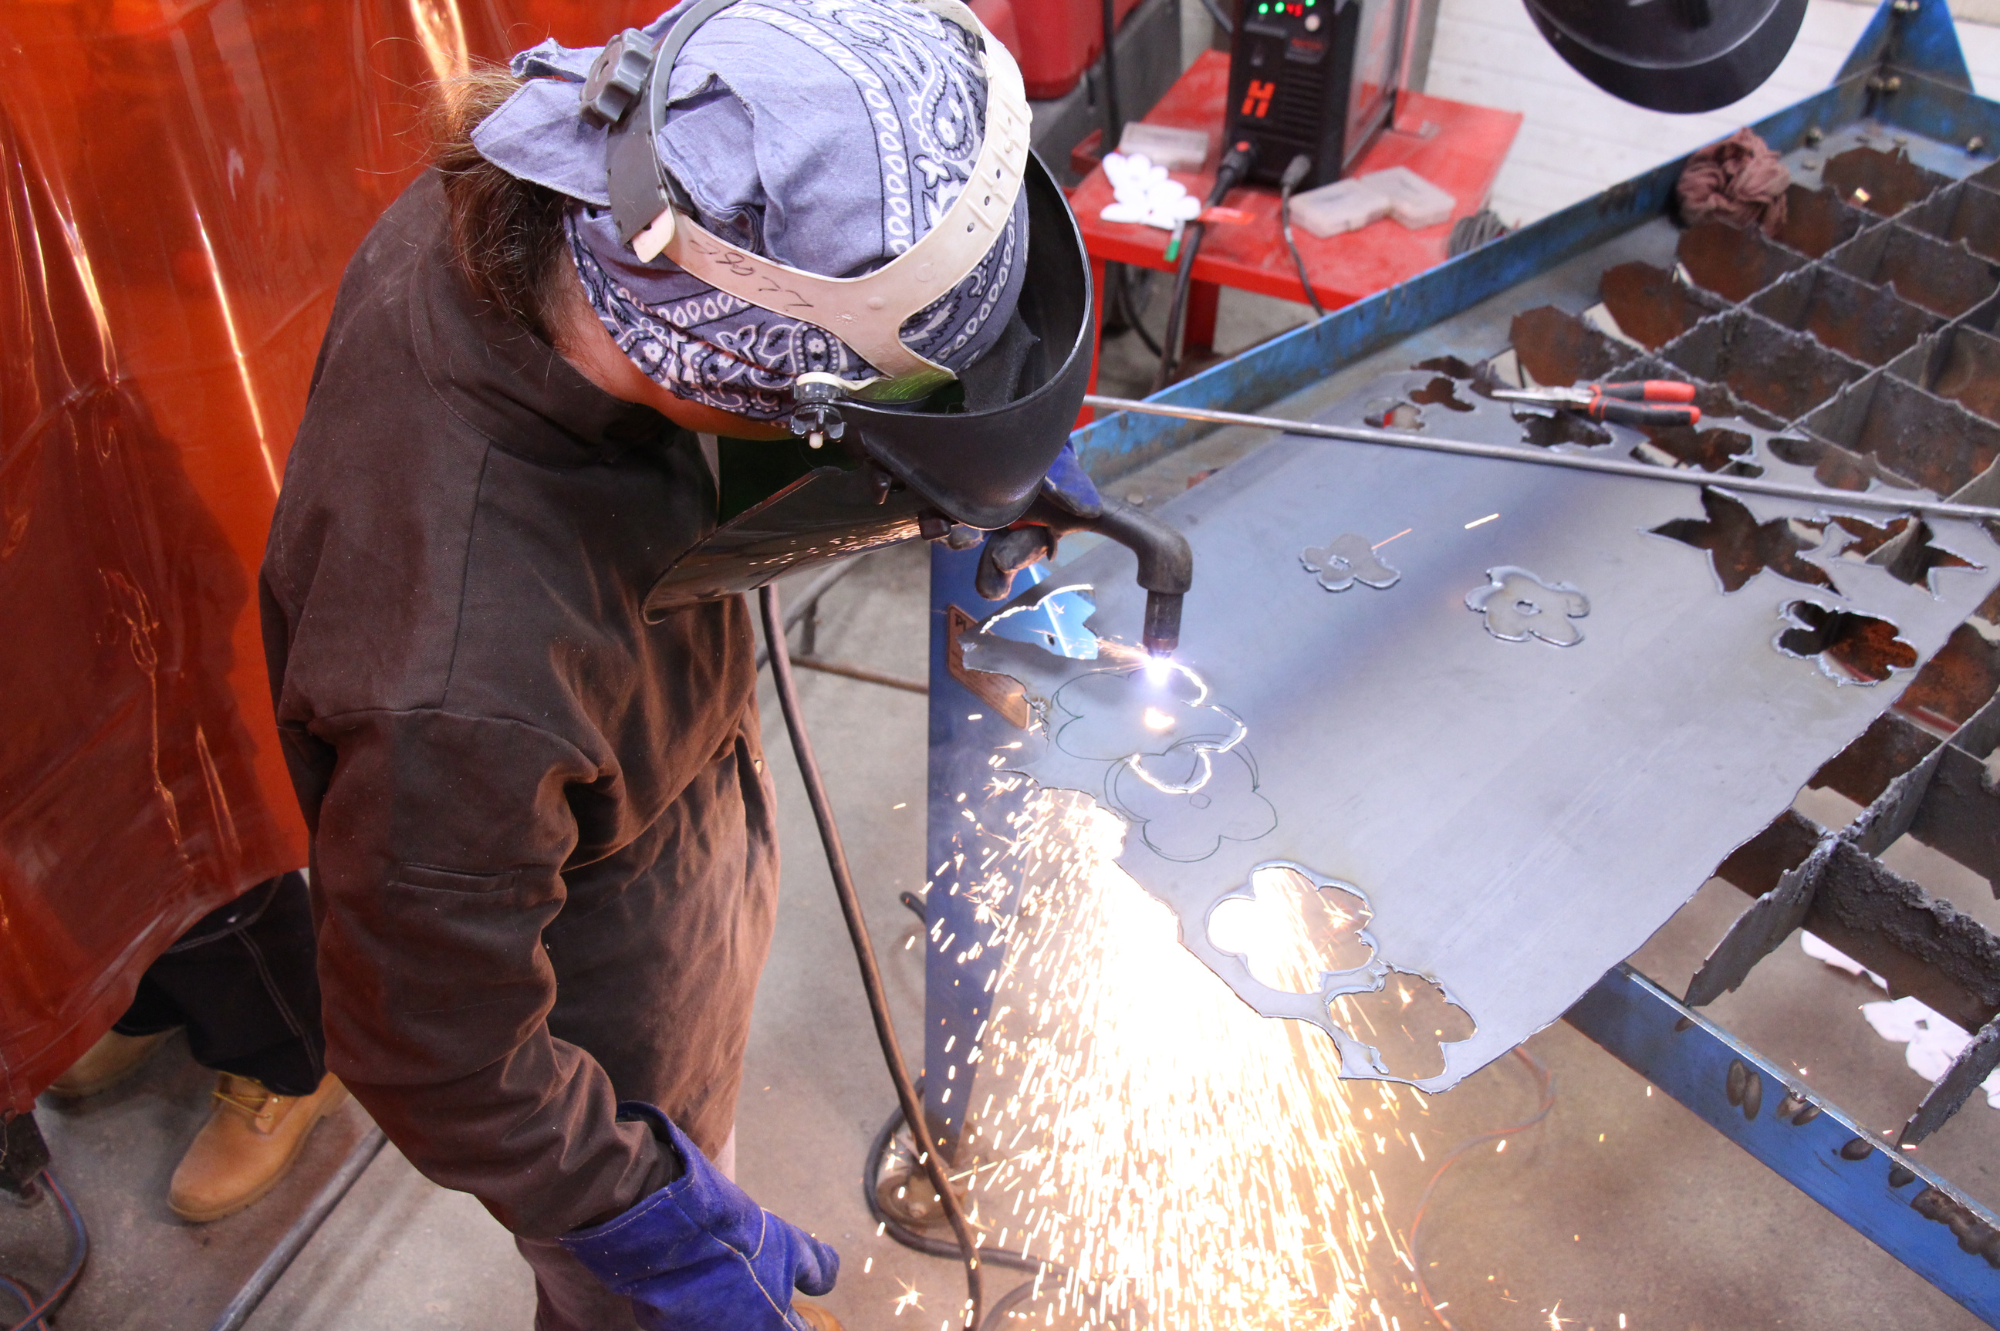 LIFT participant uses a plasma cutter to cut flowers out of sheet metal.